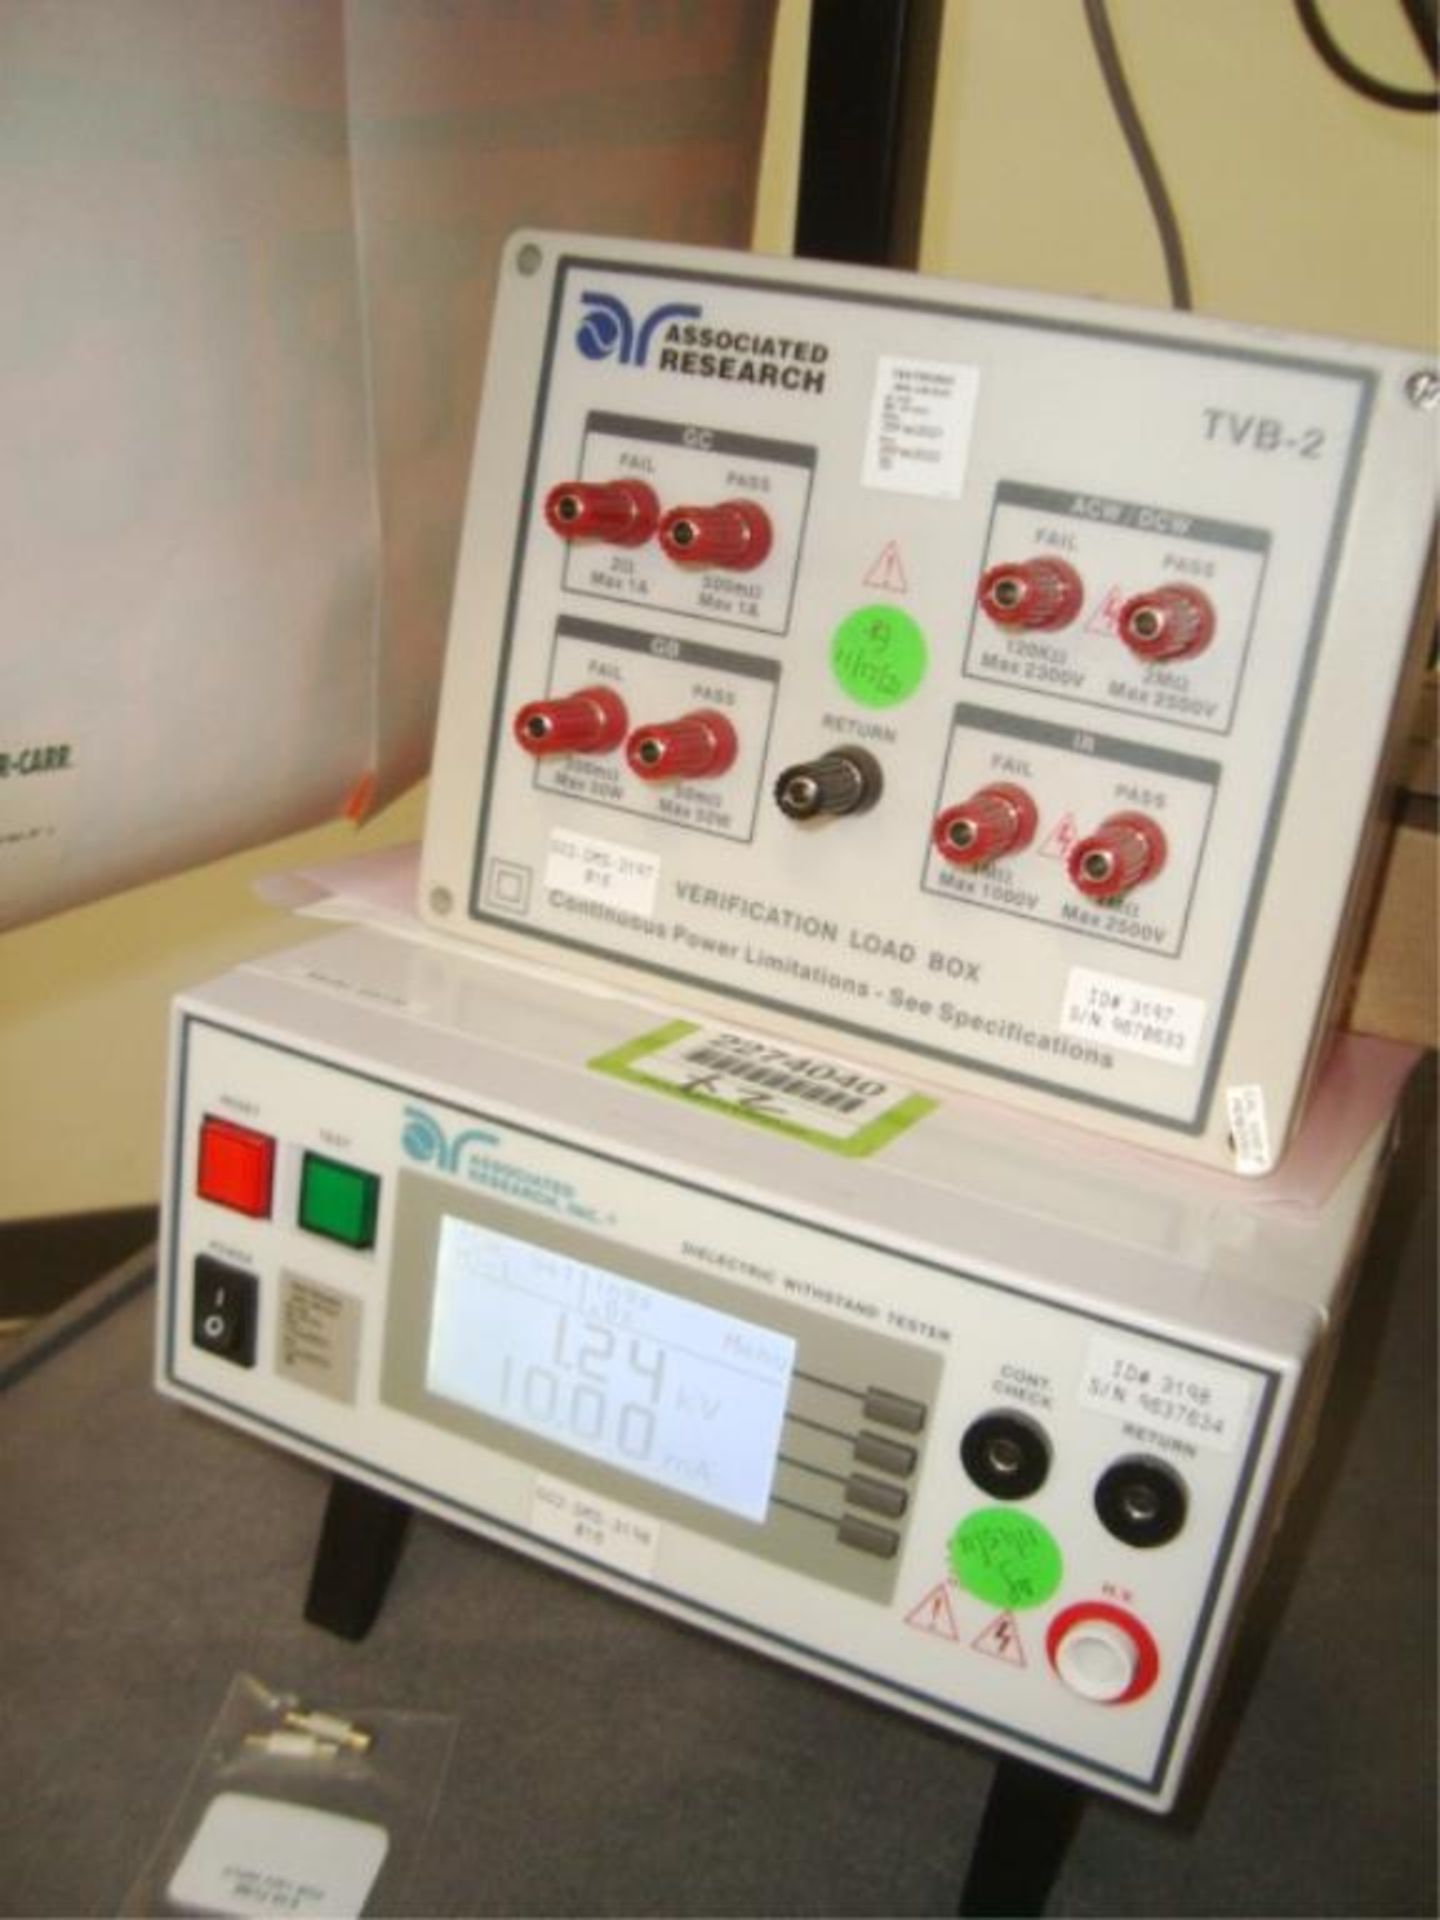 Dielectric Withstand Tester & Verification Load